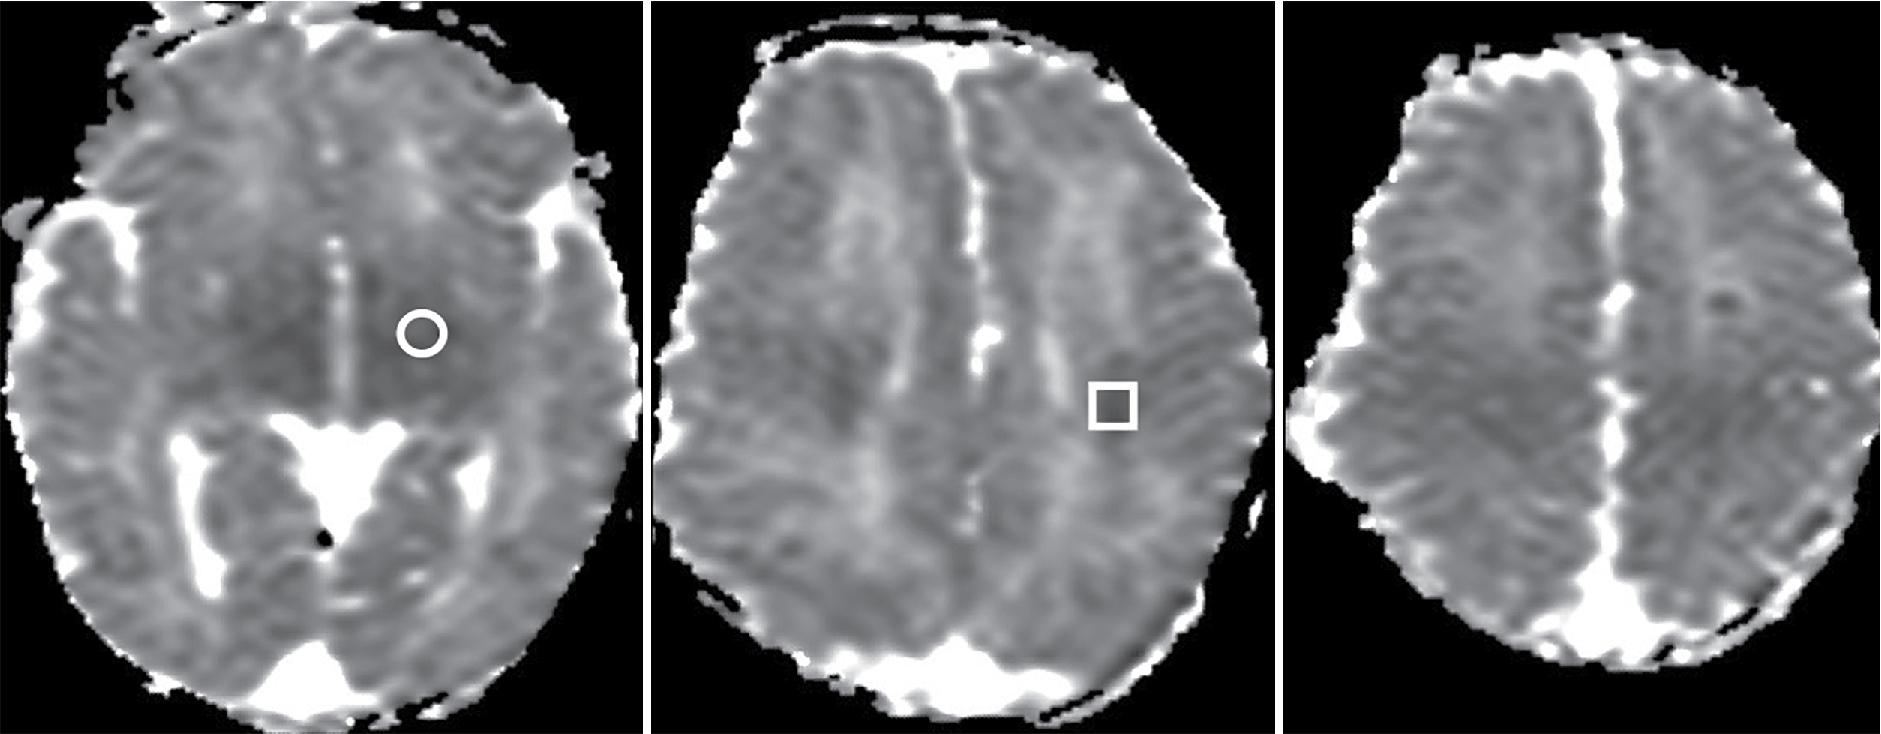 Fig. 15.5, Case 3 MRI on day 1 after perinatal asphyxia. Conventional MR Imaging reveals no signal abnormalities (not shown). DWI shows no overt lesions but ADC values measured in the left basal ganglia (ADC 0.8 mm 2 /ms) ( circle ) and central white matter (ADC 0.8 mm 2 /ms) ( square ), respectively, reveal markedly reduced ADC values compared to normal term neonates (around 1.6 mm 2 /m).